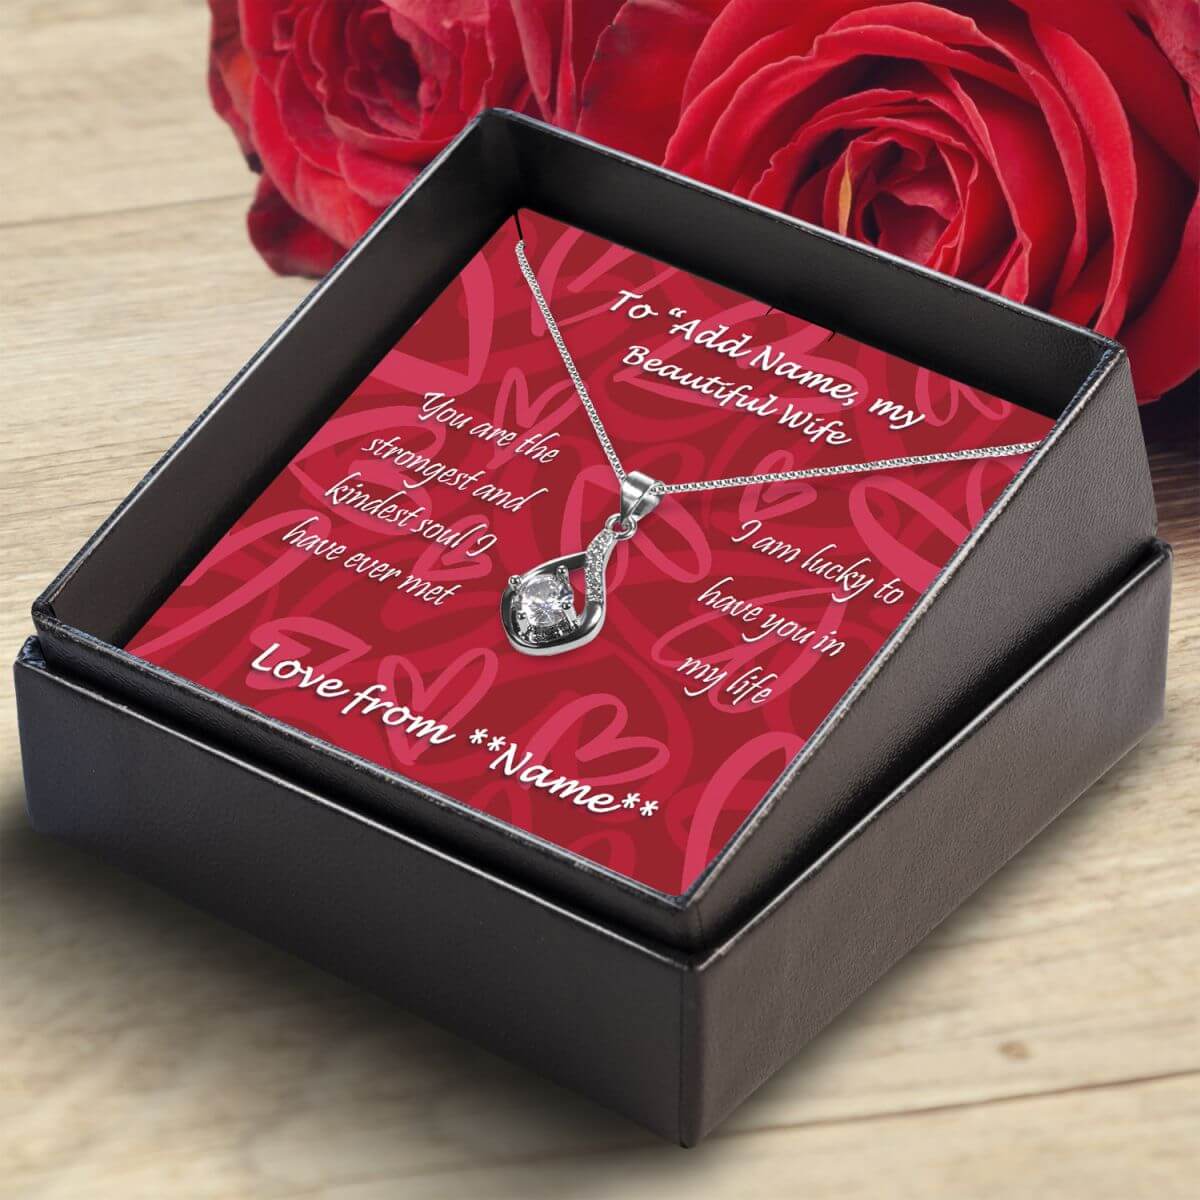 Necklace-Box-angled-Love-Drop-Beautiful-Wife-personalised - BIG ON Jewellery, BIG ON Necklaces